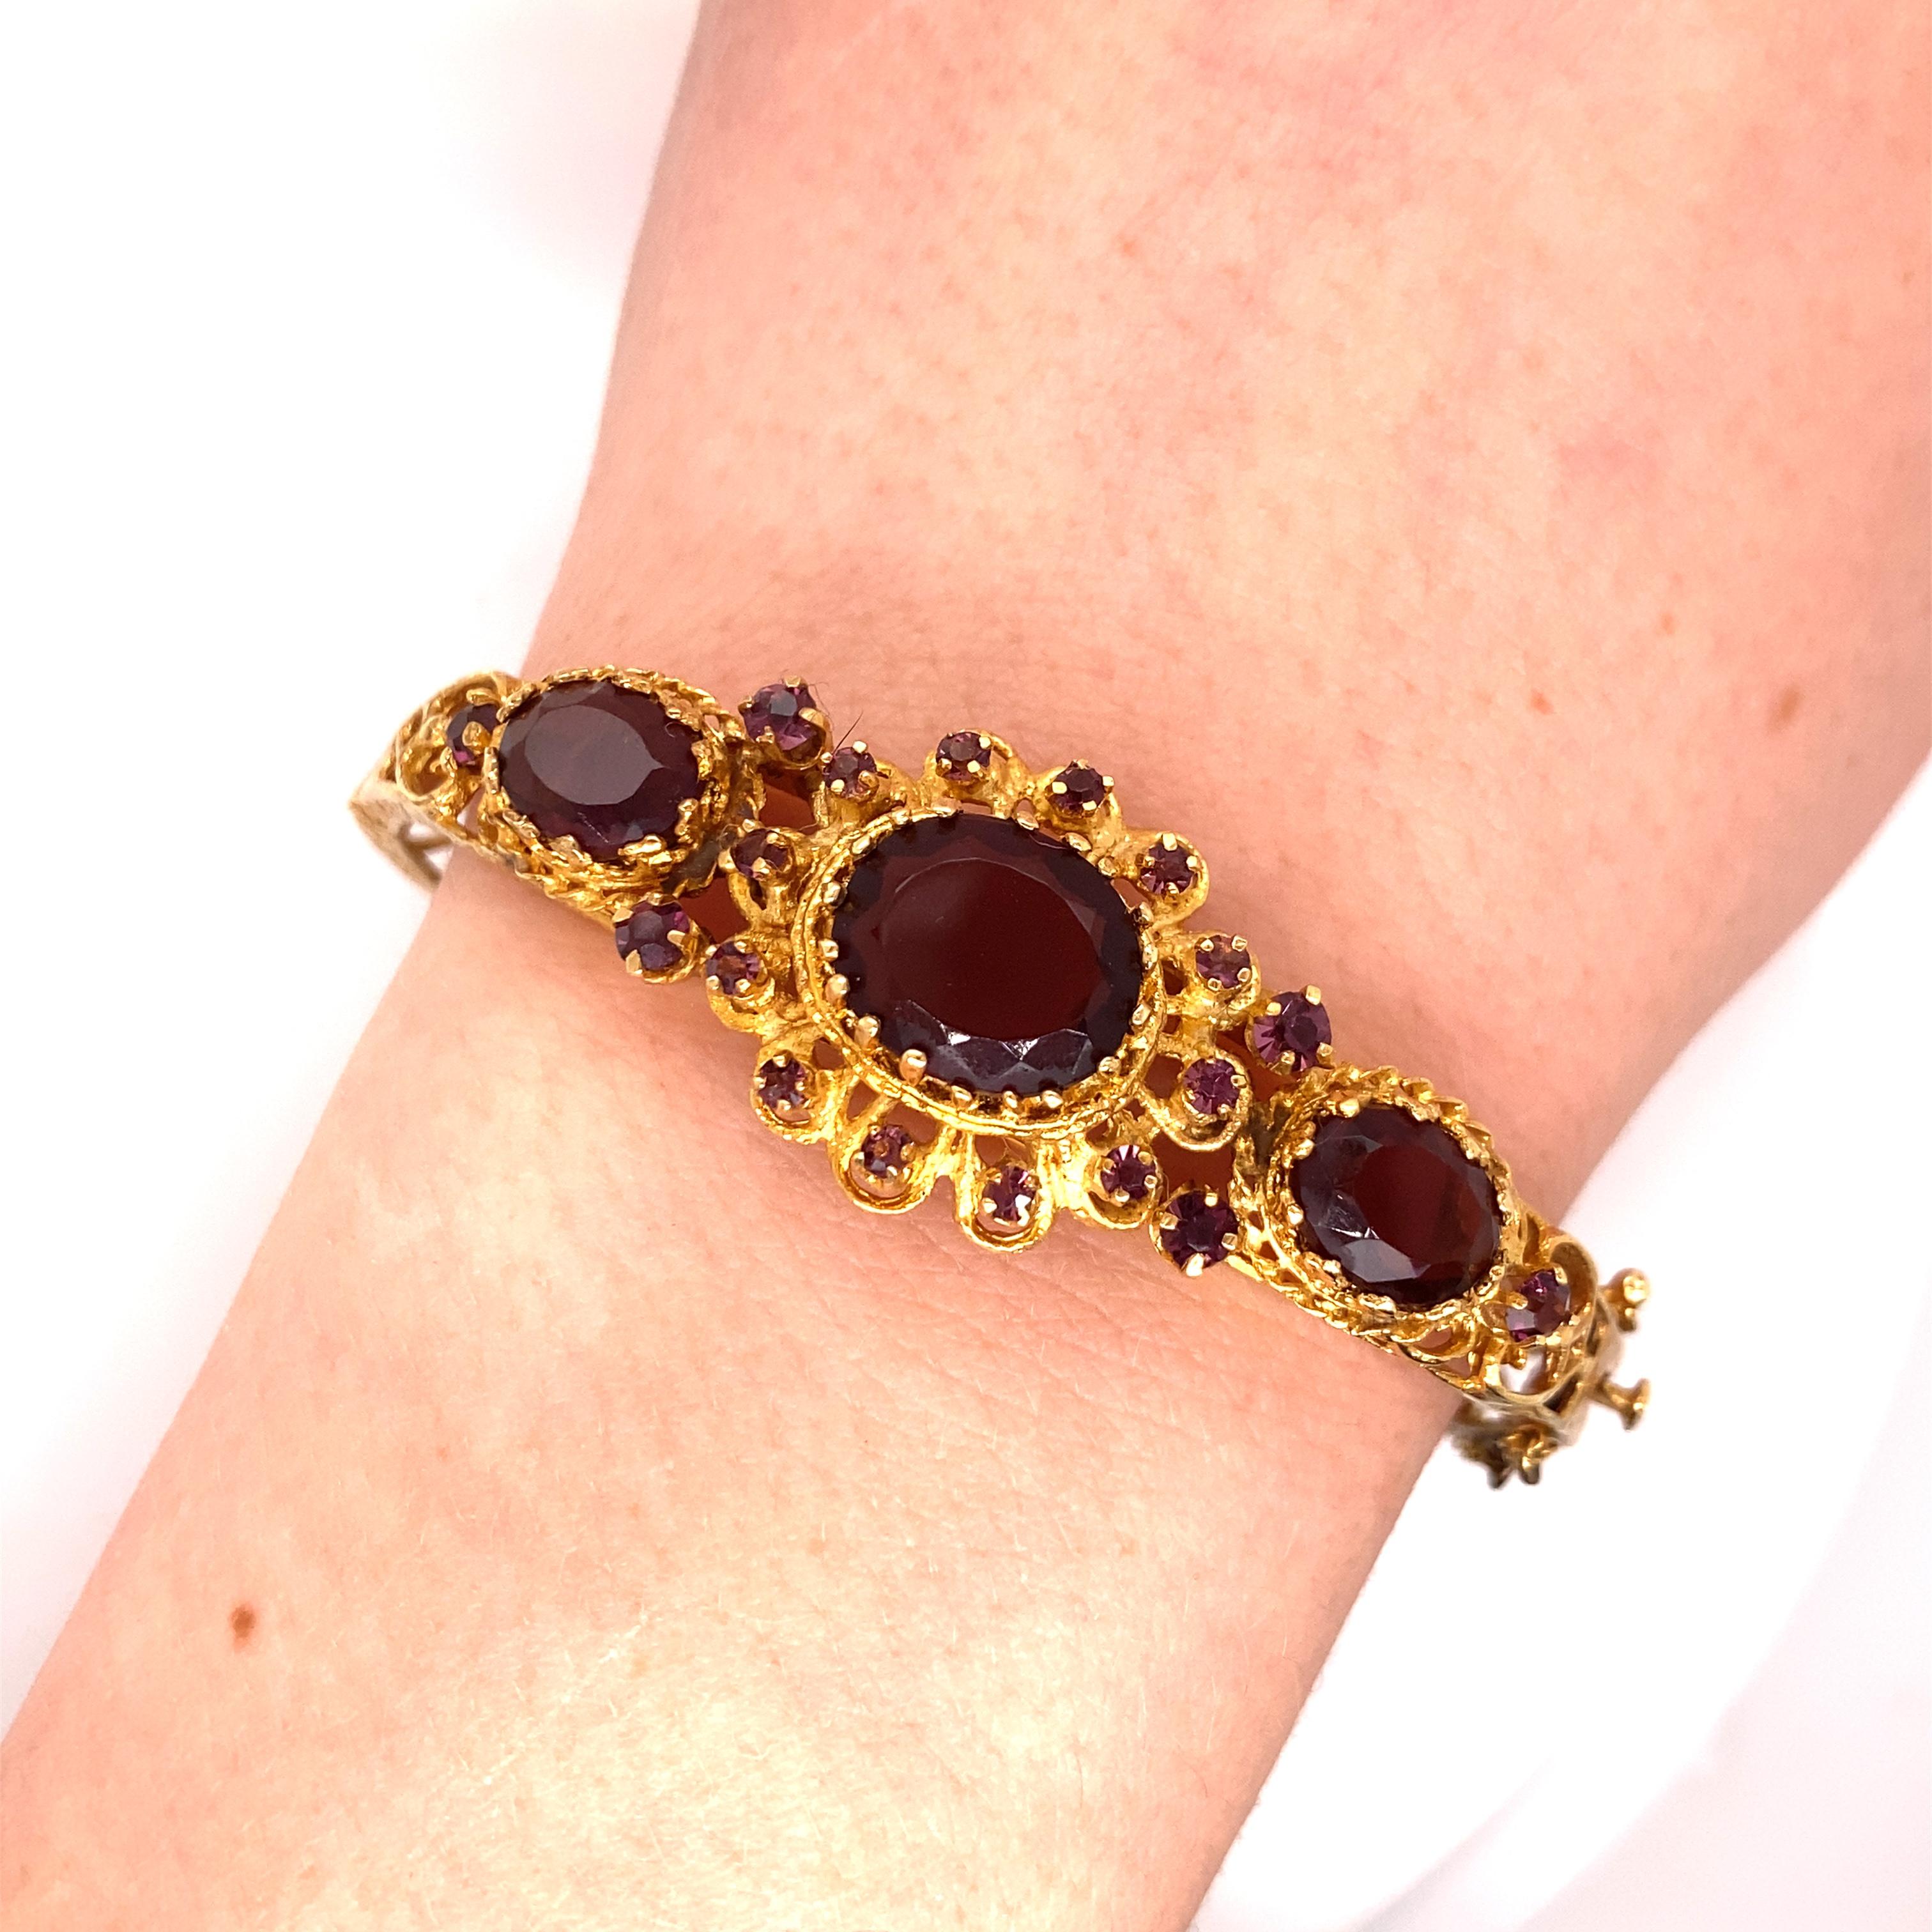 Vintage 1960's 14K Yellow Gold Bangle Bracelet with Purple Stones - The bangle's width is .75 inches. The inside diameter is 1.85 inches high by 2.50 inches wide. The bangle has engraved detail and filigree workmanship. The weight of the bracelet is